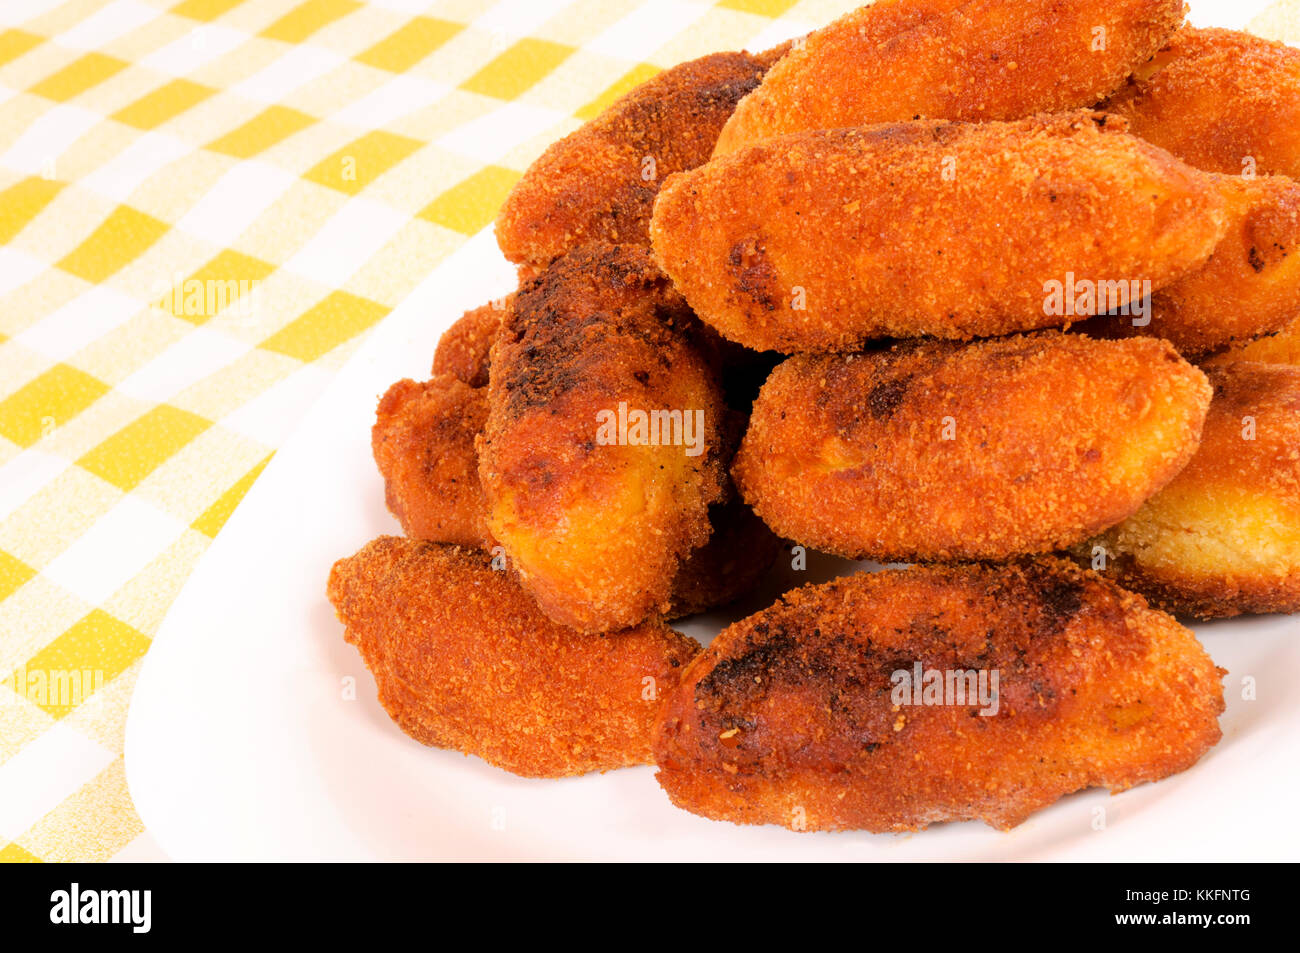 Fried junk food as the sticks Stock Photo